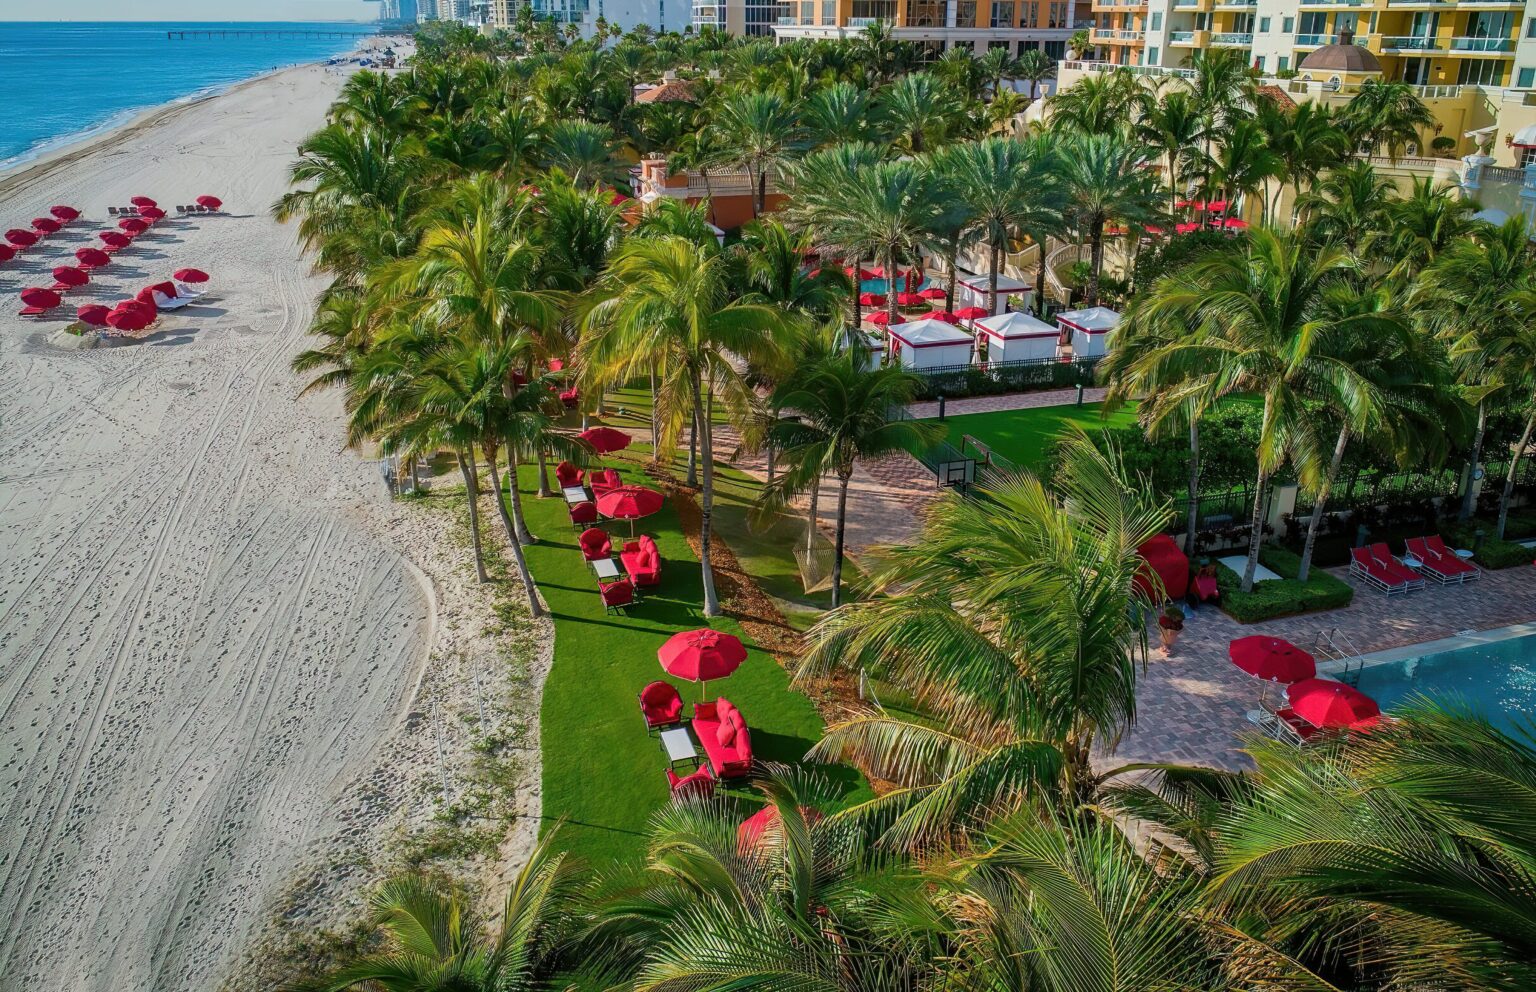 Acqualina Resort And Residences On The Beach 1536x992 